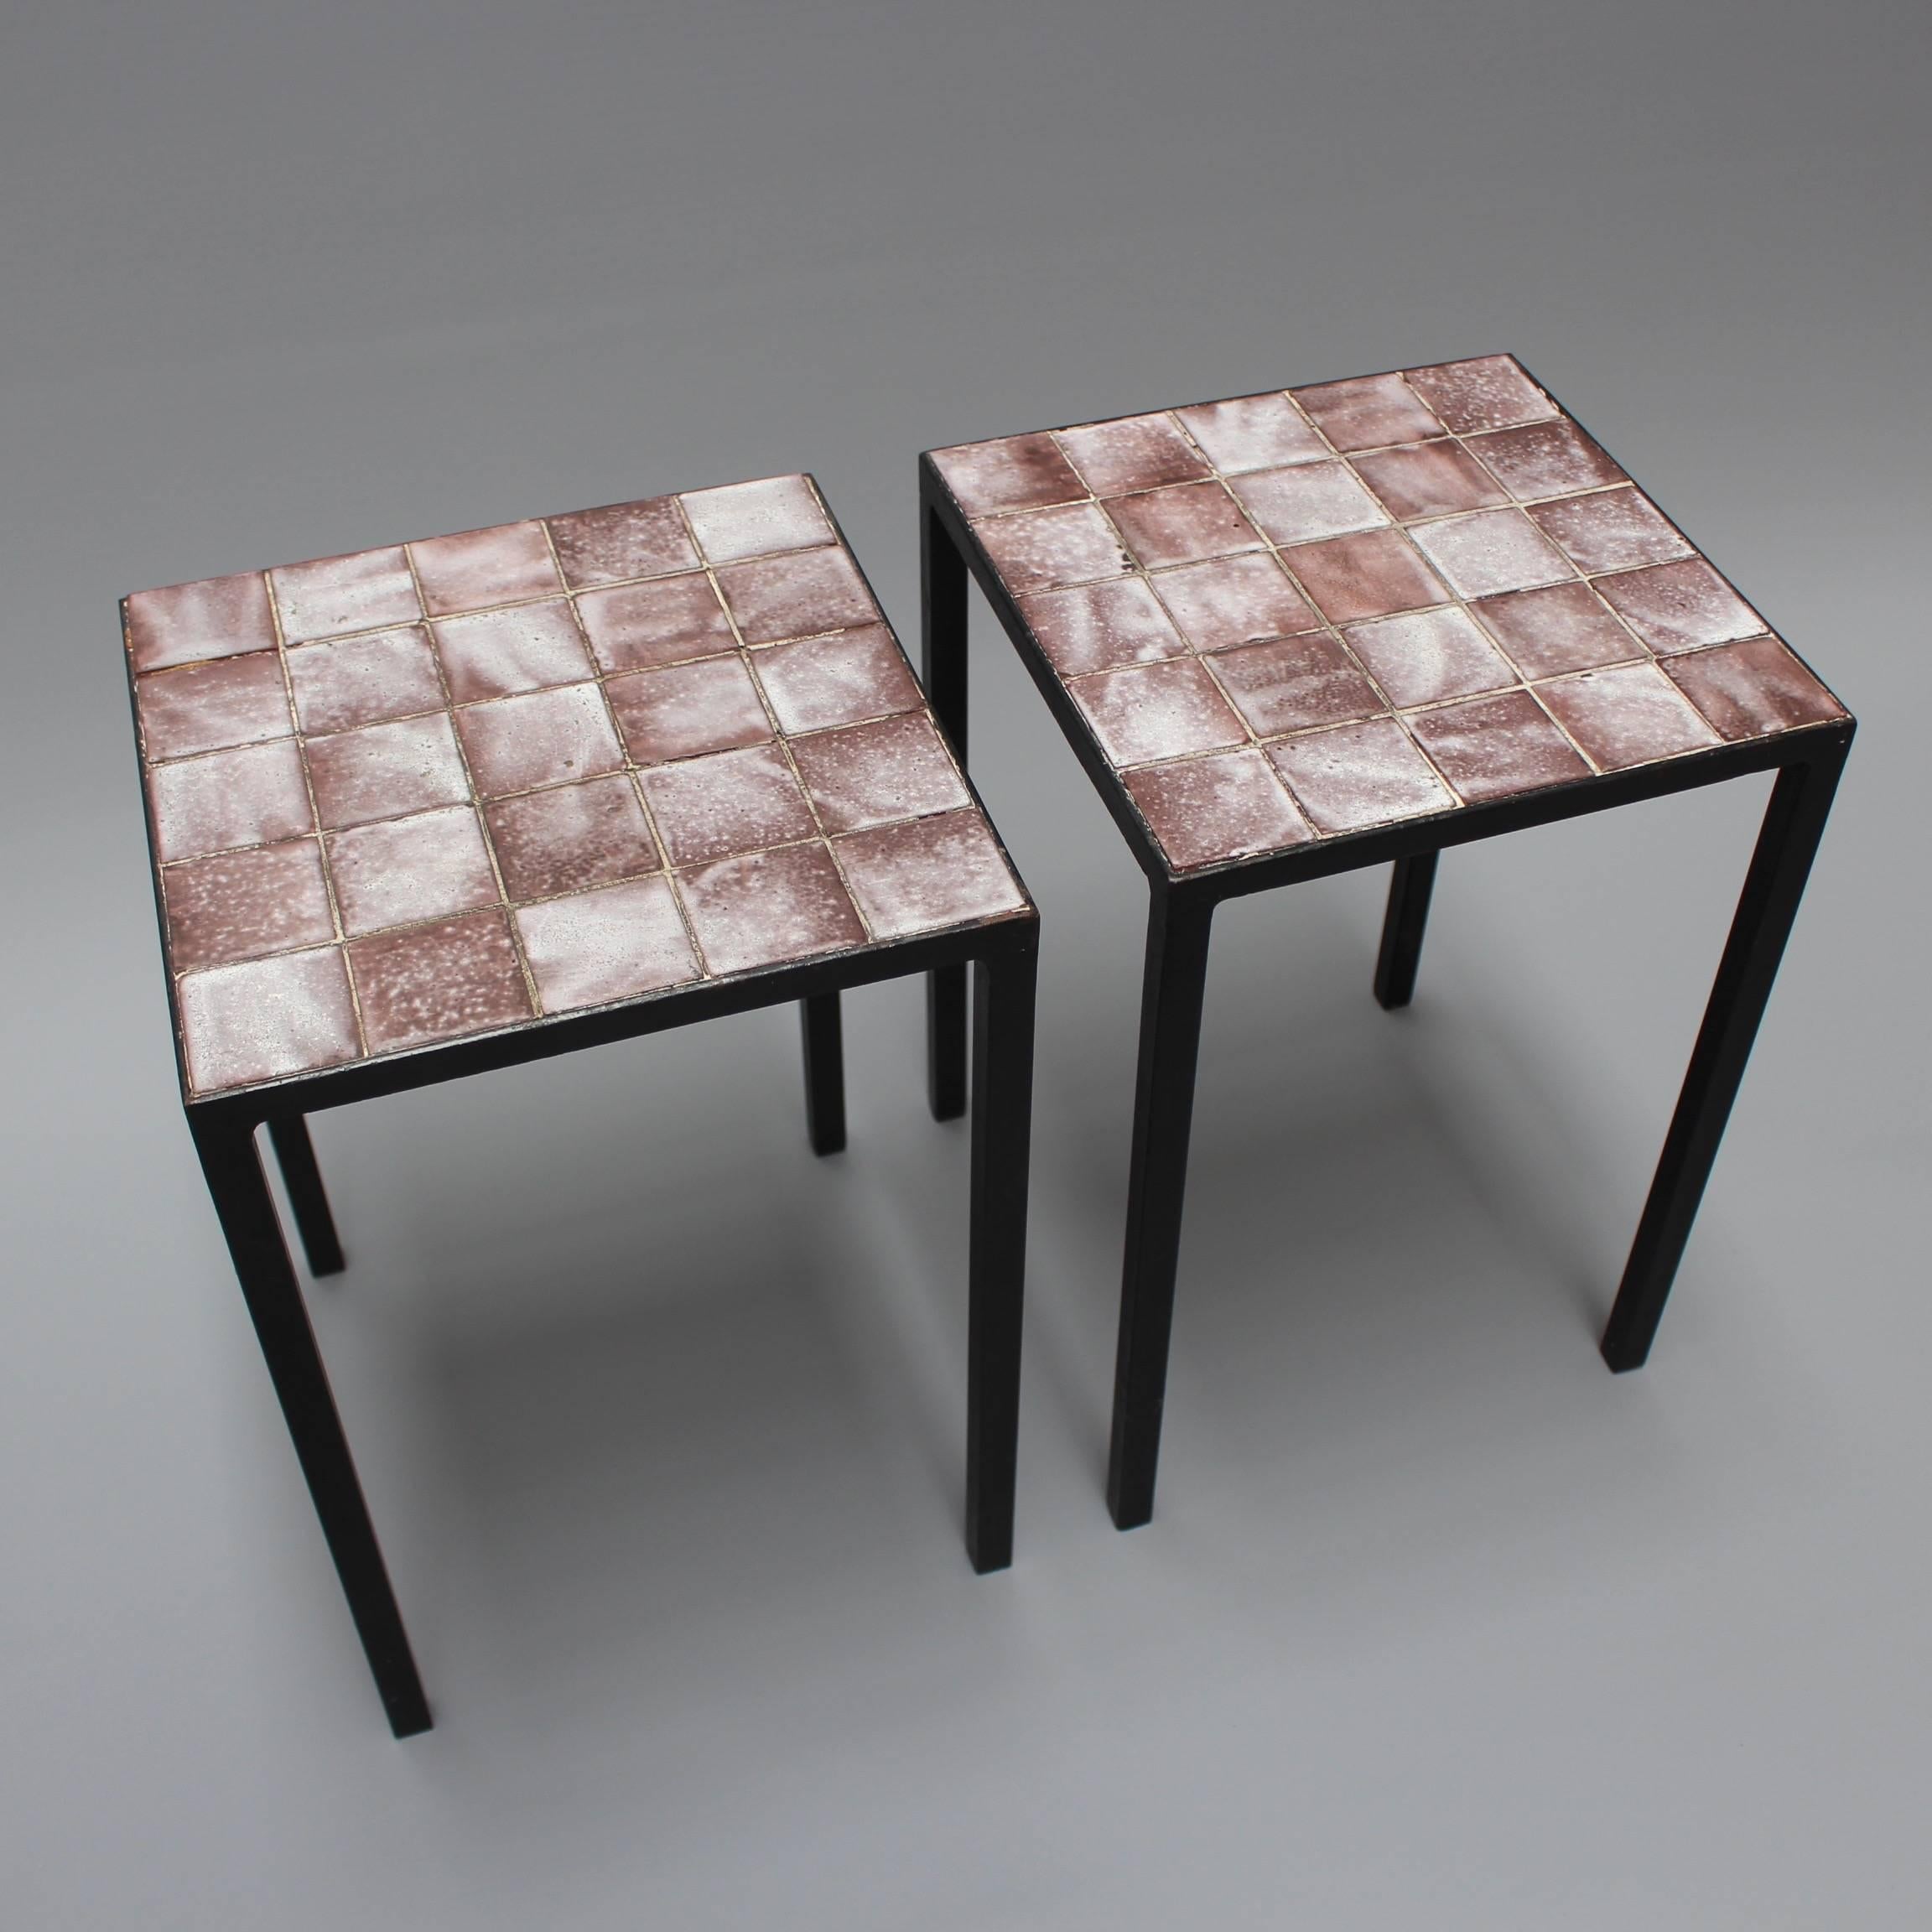 Glazed Set of Two Purple Ceramic Tiled Side Tables by Mado Jolain, circa 1950s -1960s